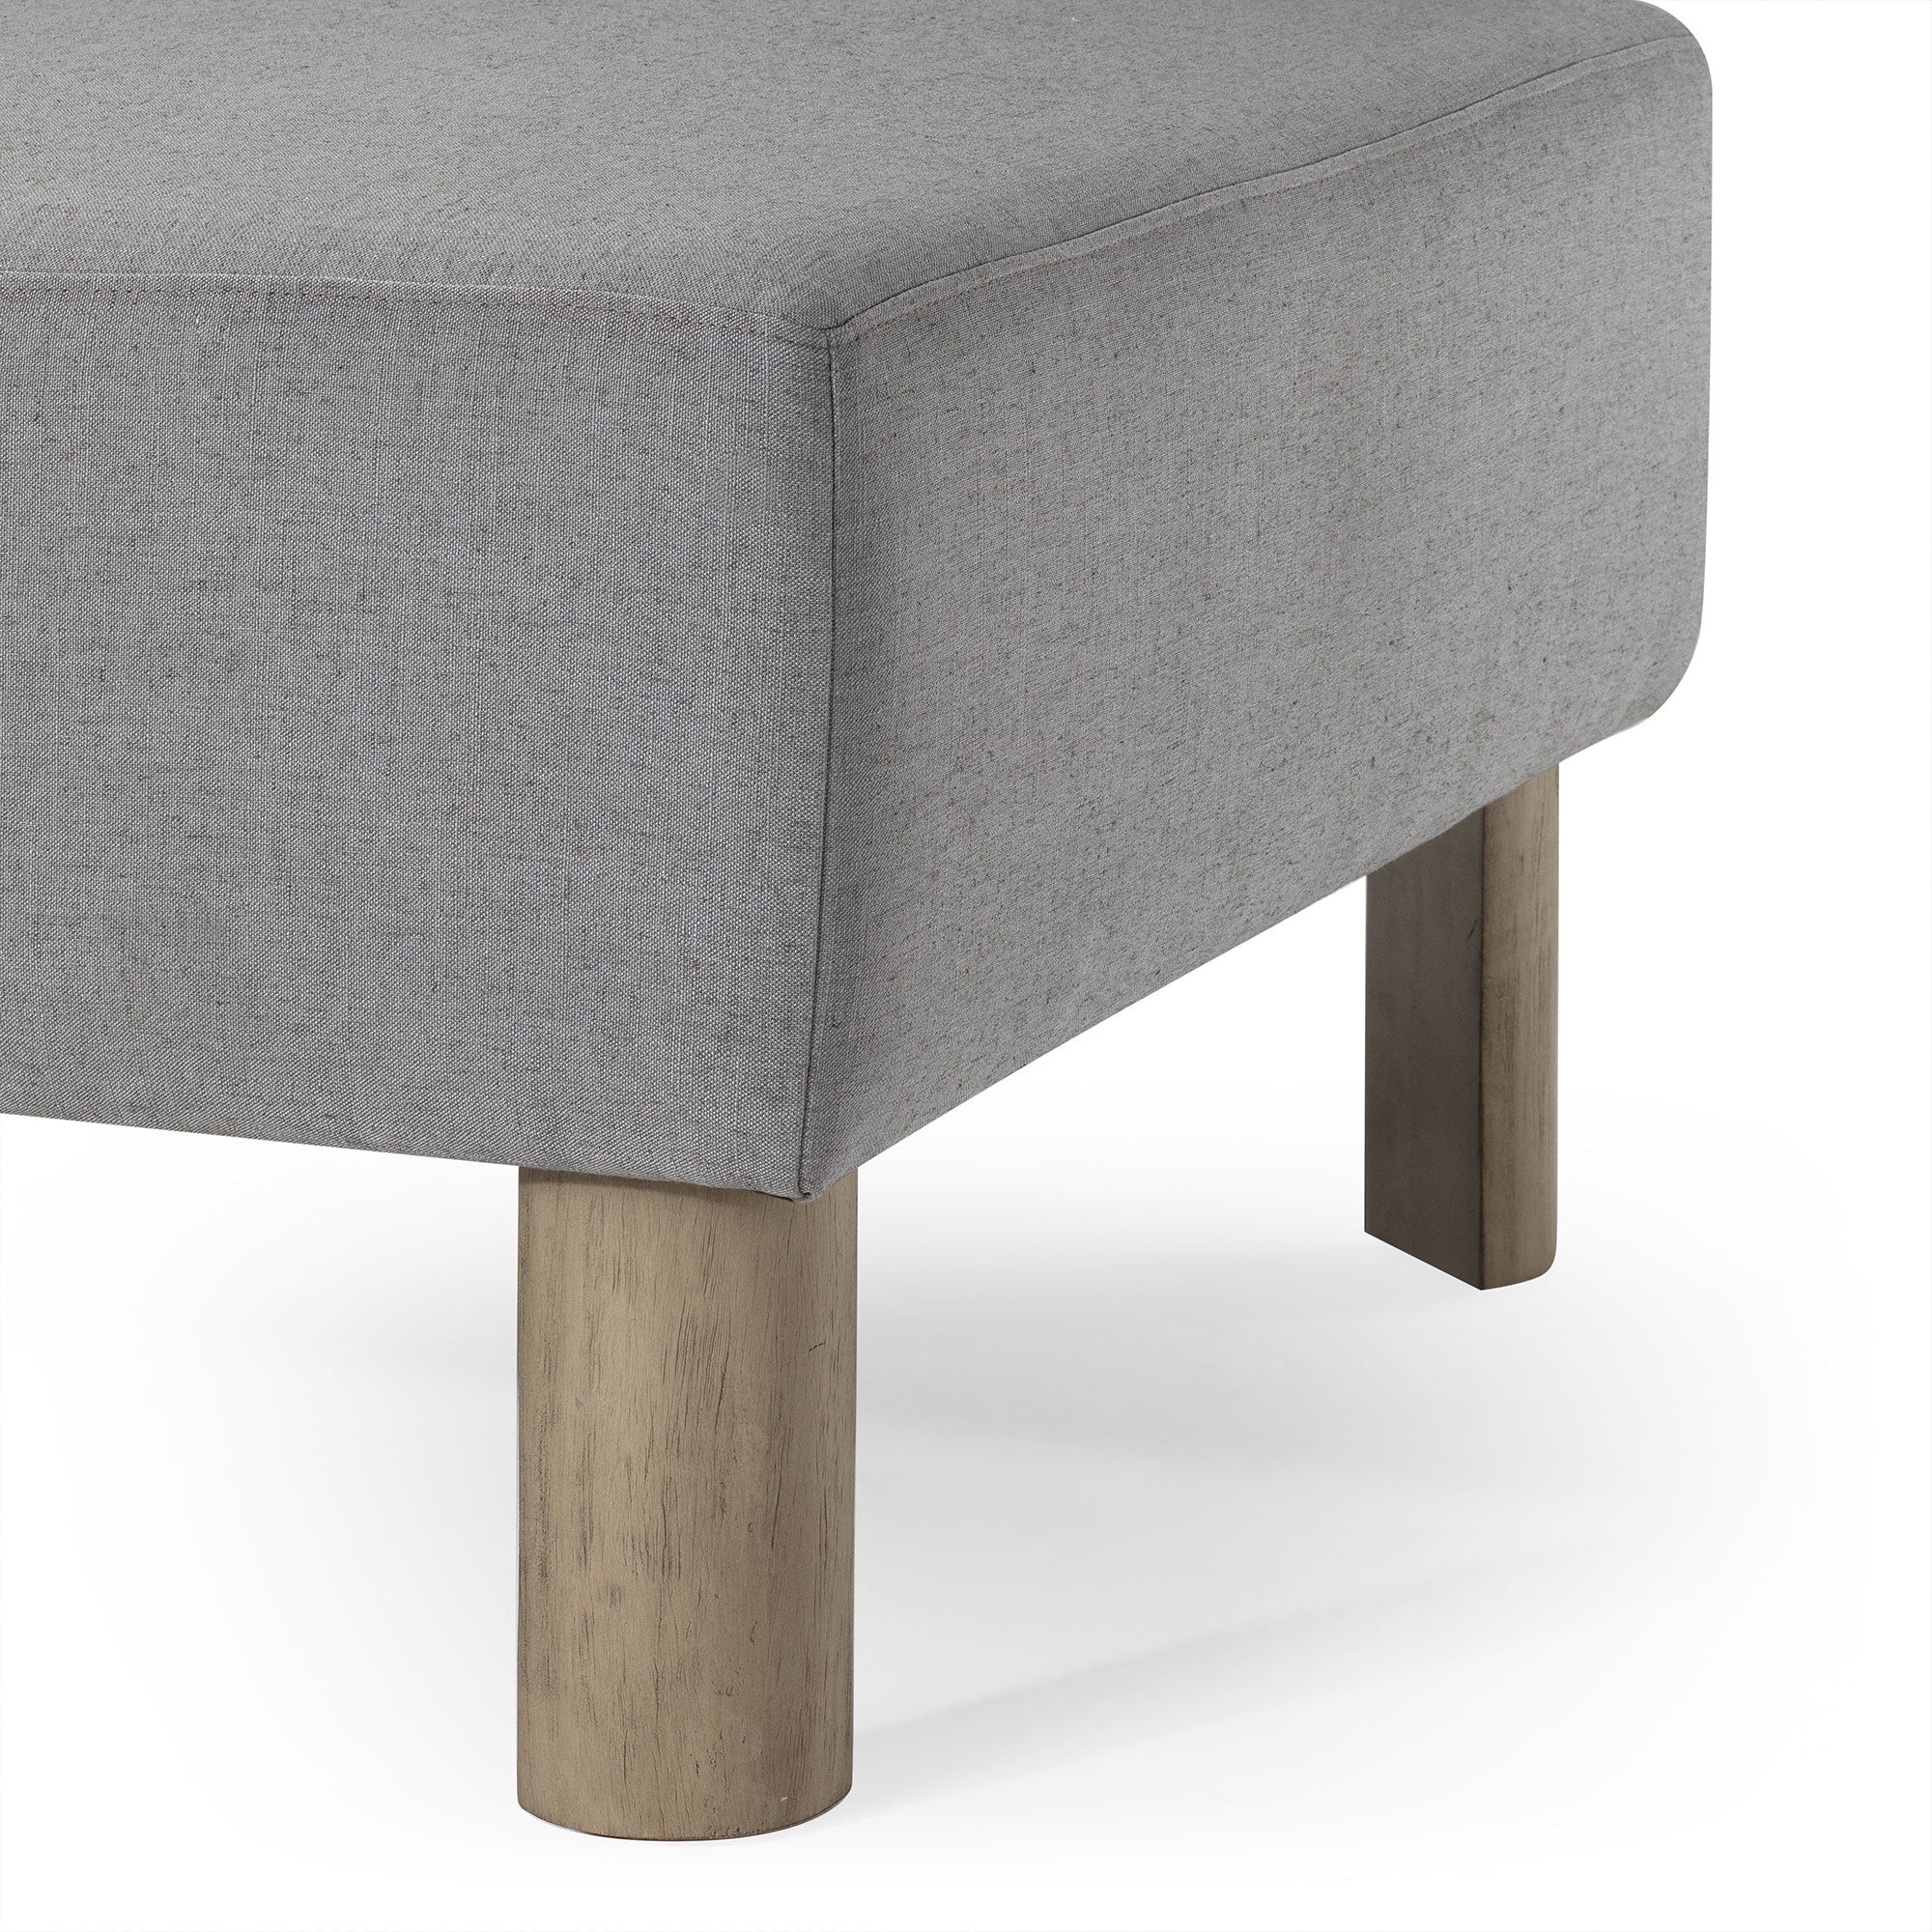 Lena Contemporary Upholstered Ottoman with Refined Grey Wood Finish in Ottomans & Benches by Maven Lane